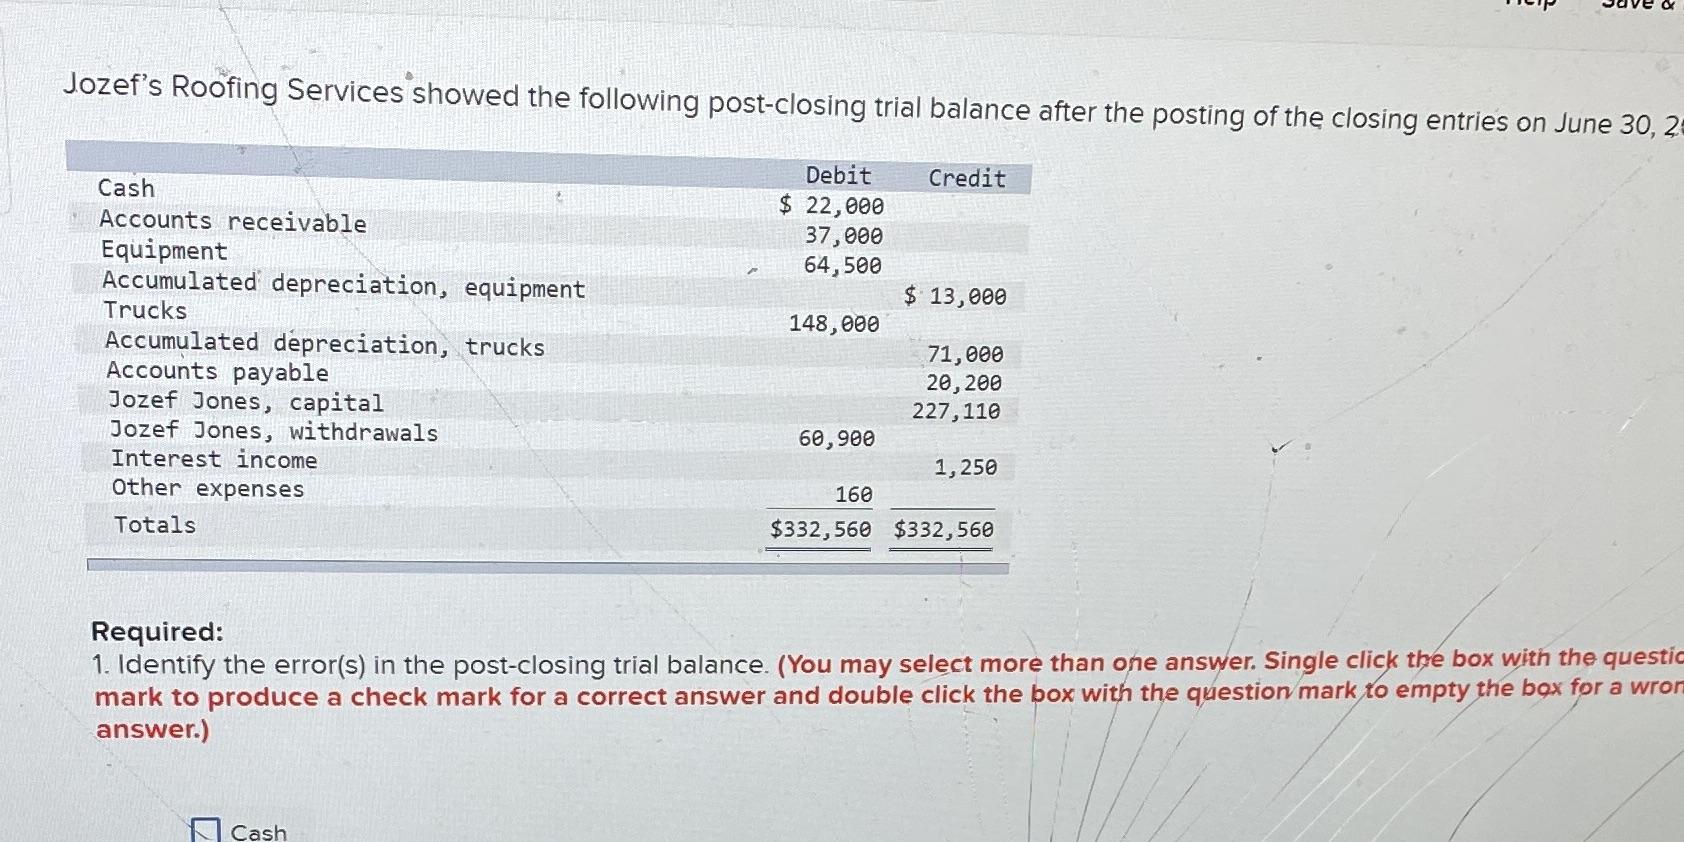 Jozef's Roofing Services showed the following post-closing trial balance after the posting of the closing